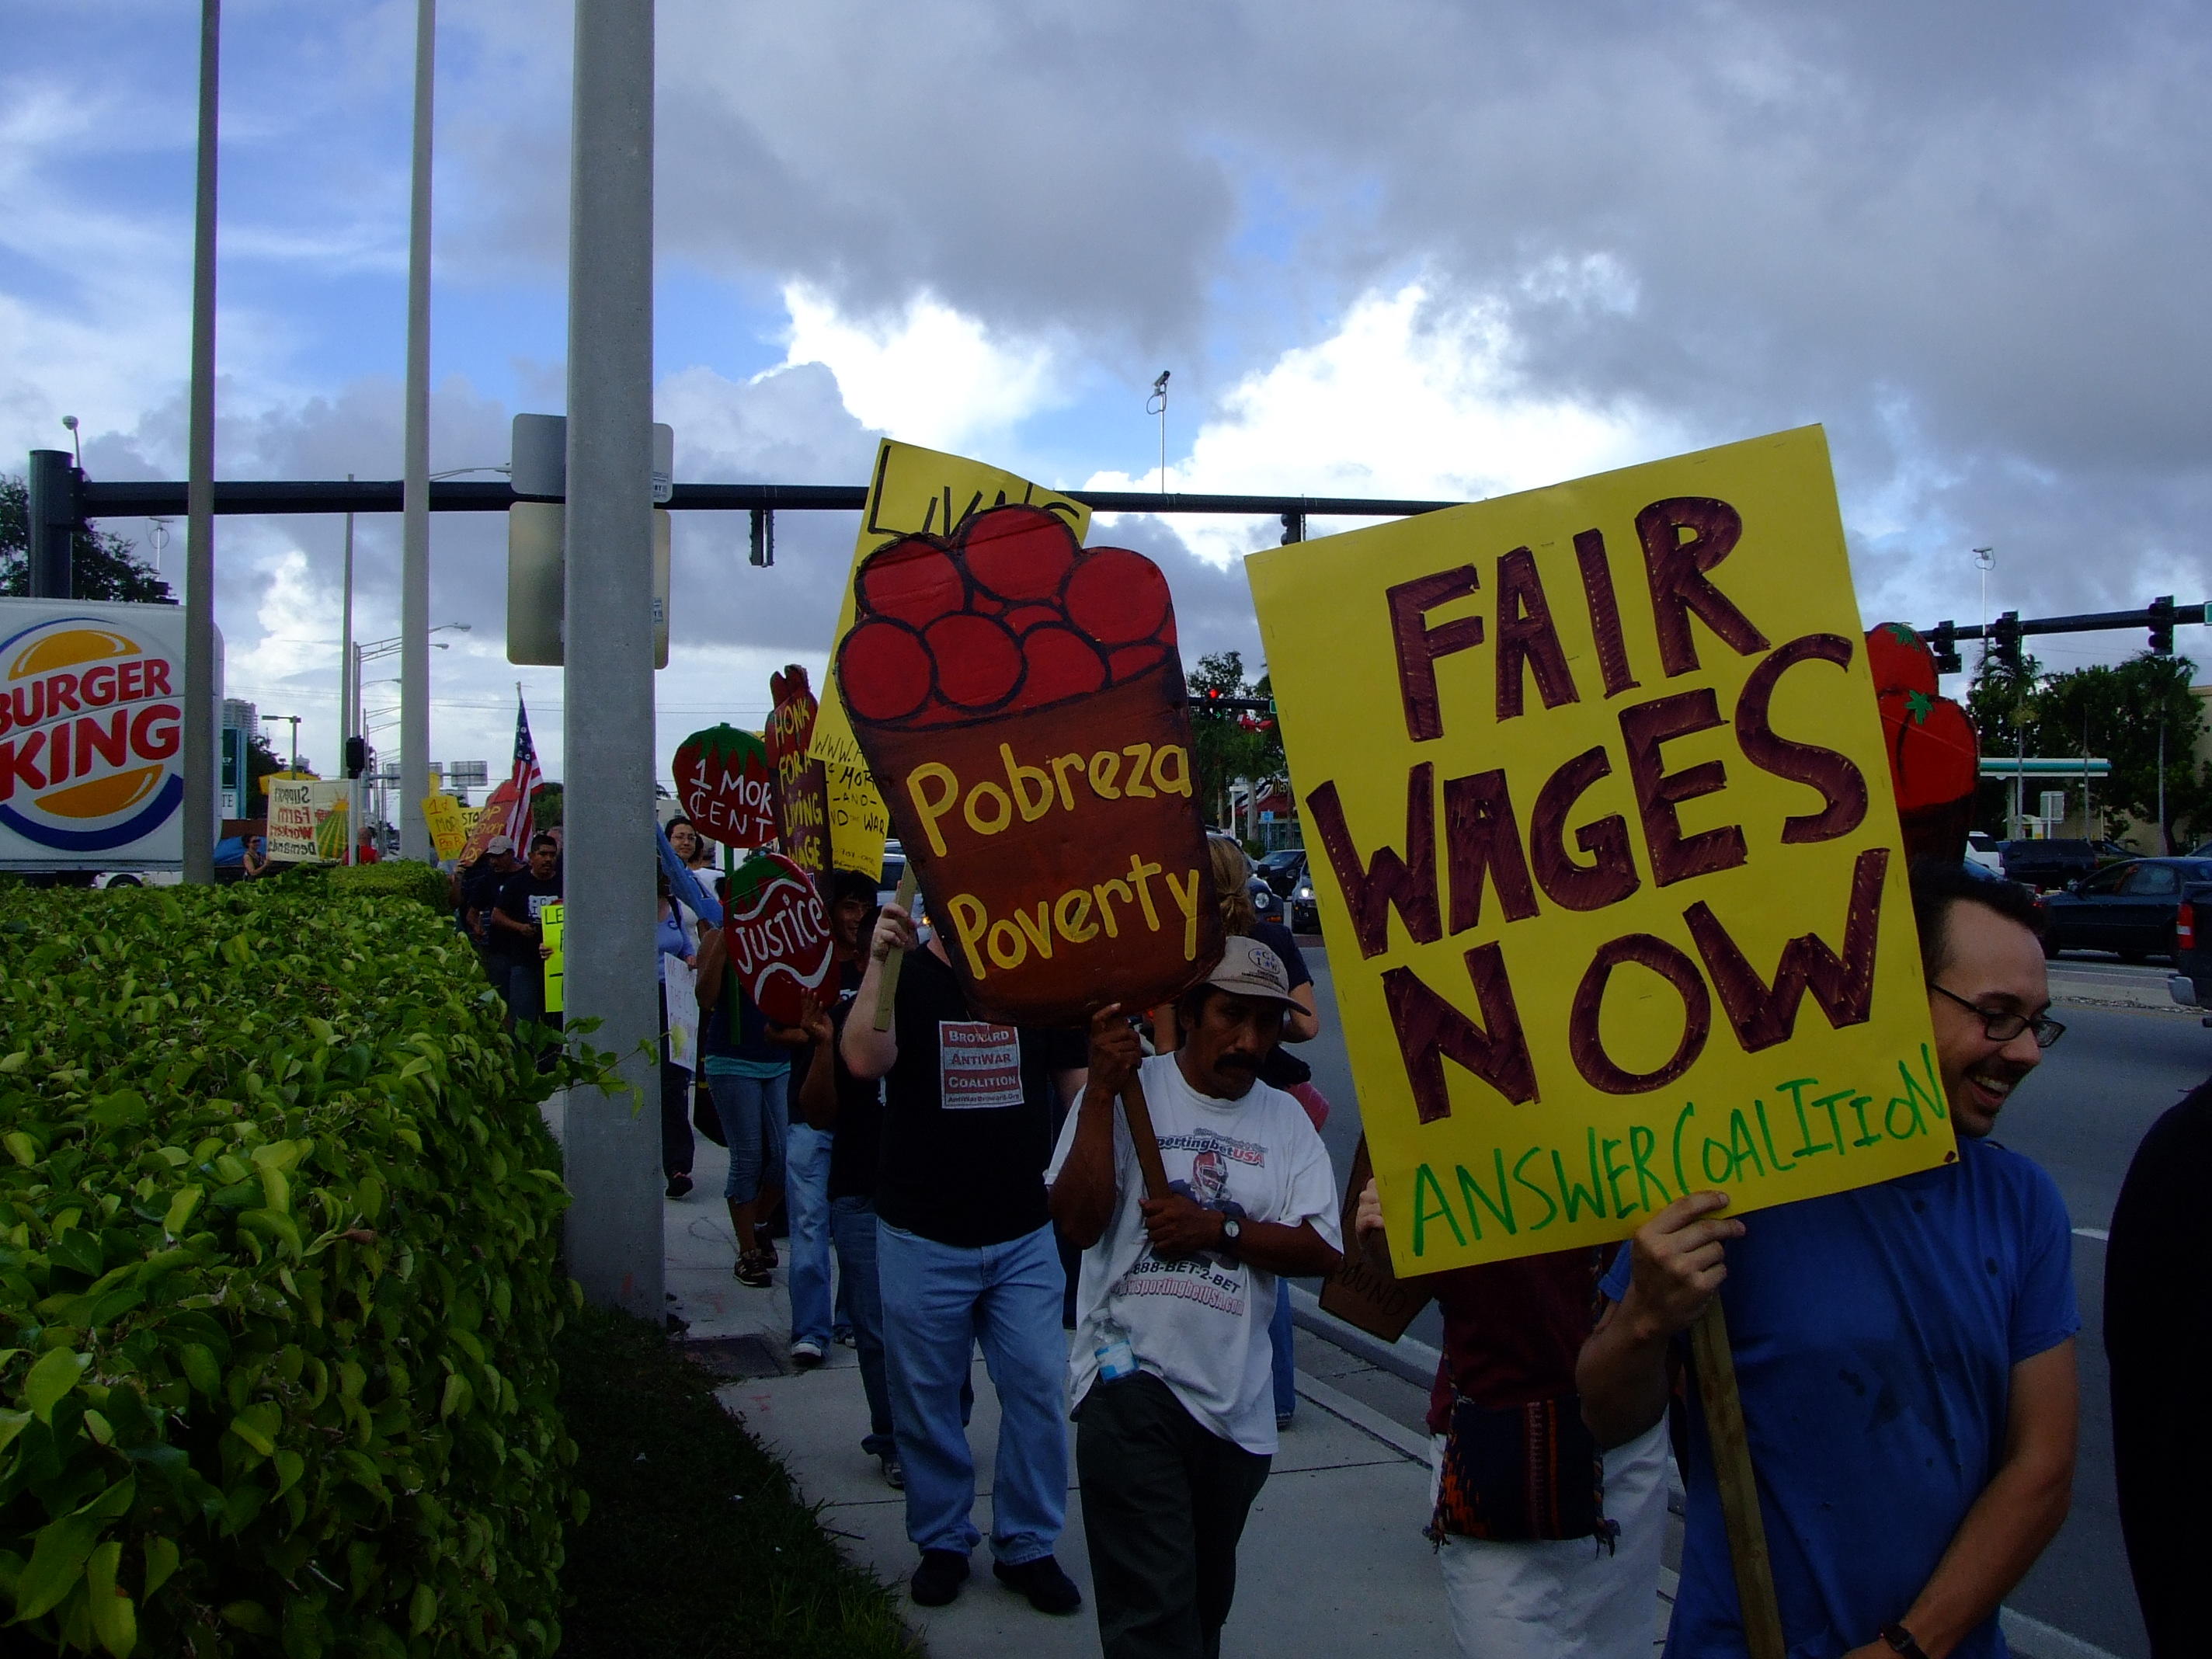 Image of Coalition of Immokalee Workers protest at a Burger King restaurant (ca. August 2007)